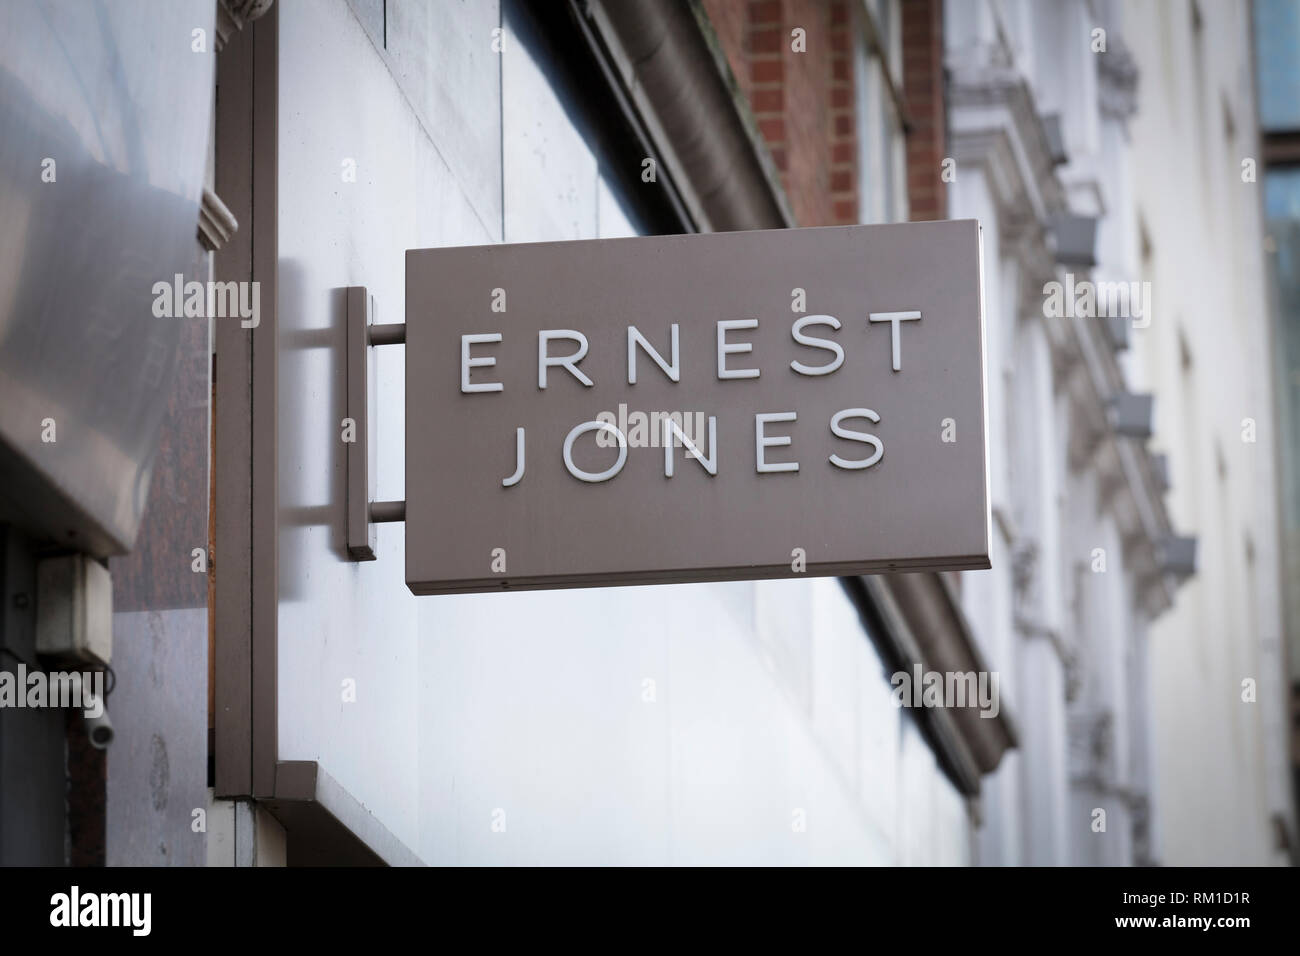 London, Greater London, United Kingdom, 7th February 2018, A sign and logo for Ernest Jones Store Stock Photo